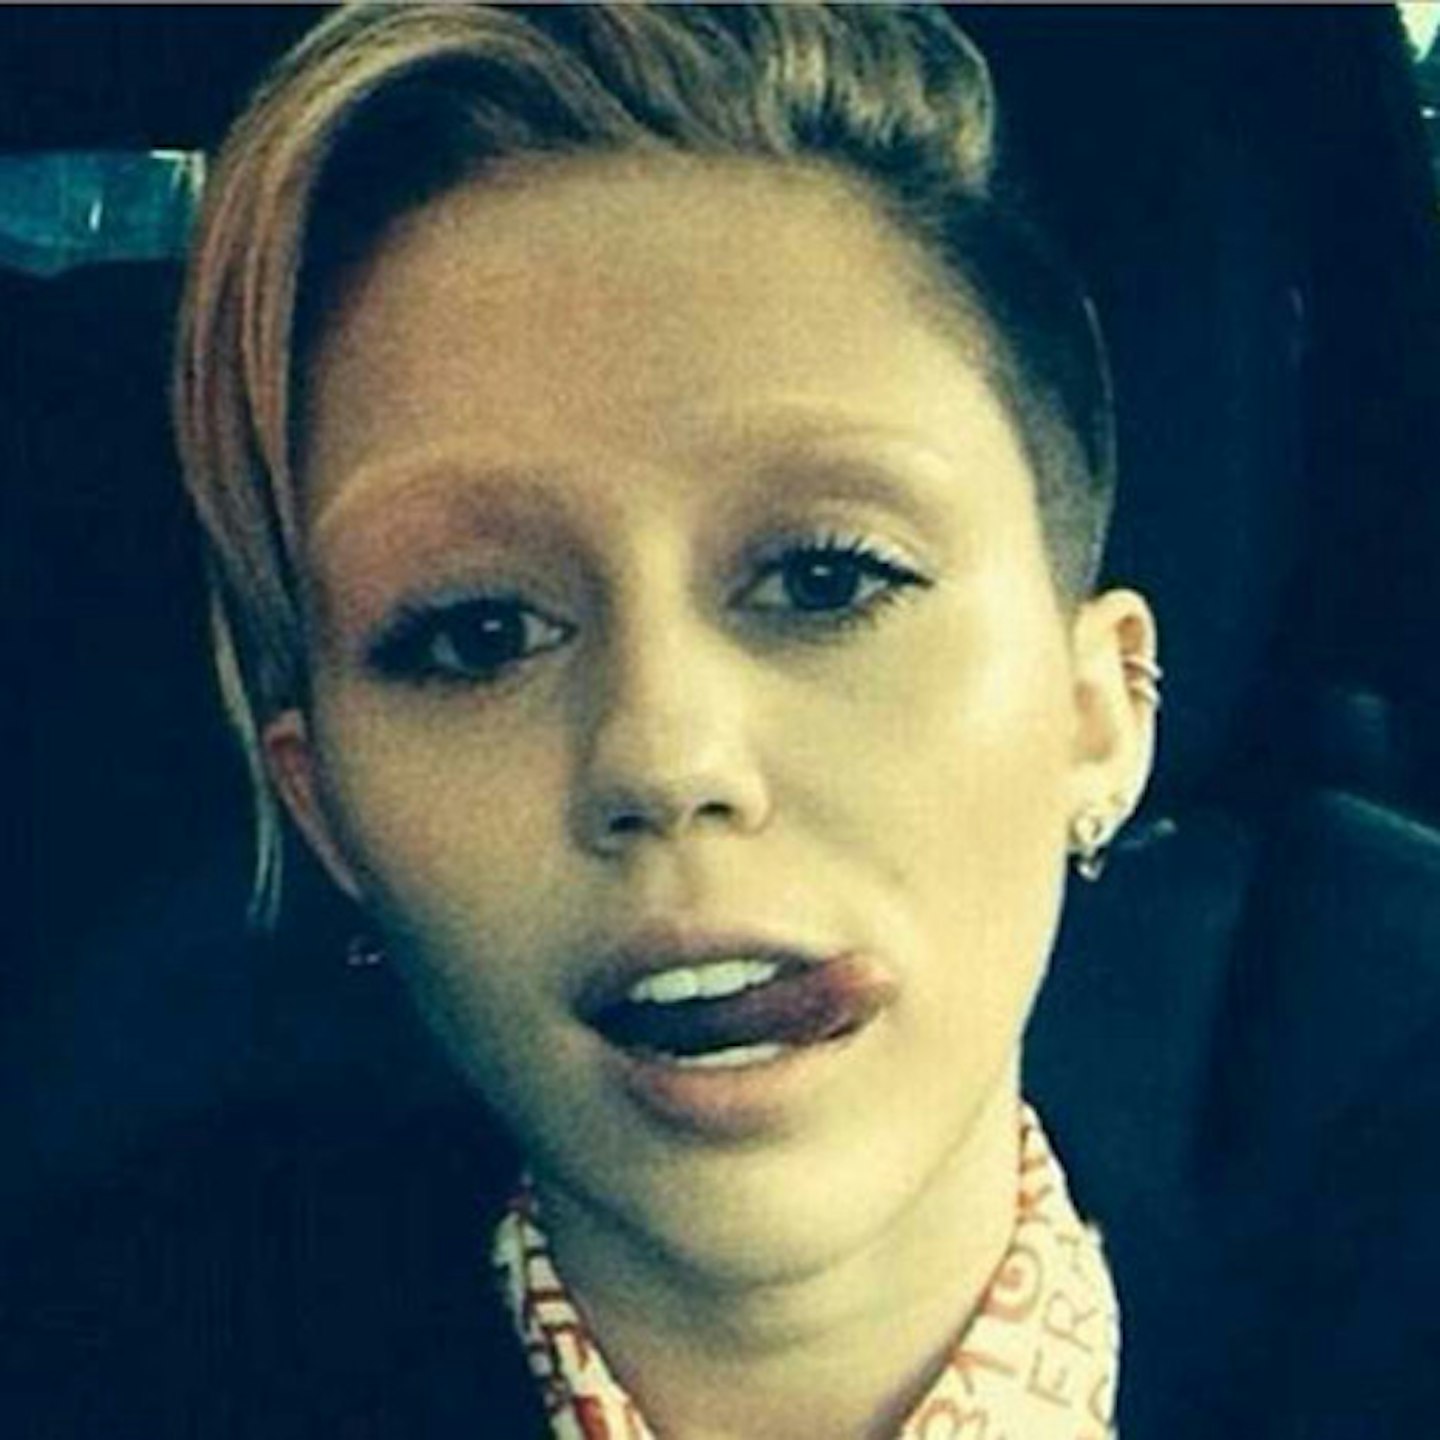 Miley bleached her eyebrows previously - luckily it's grown out now...